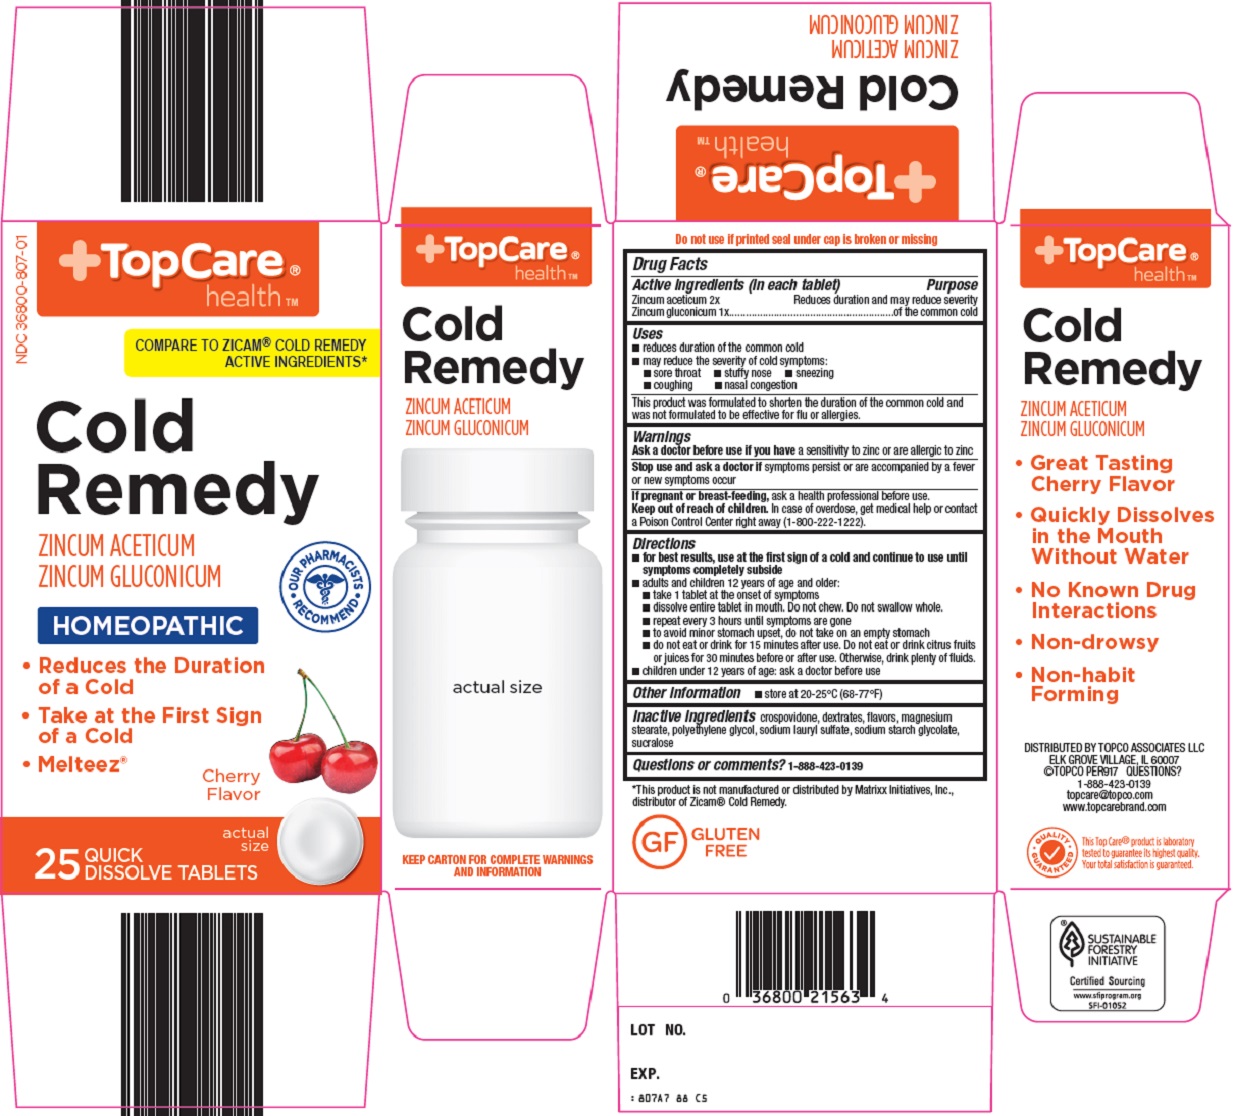 cold-remedy-image